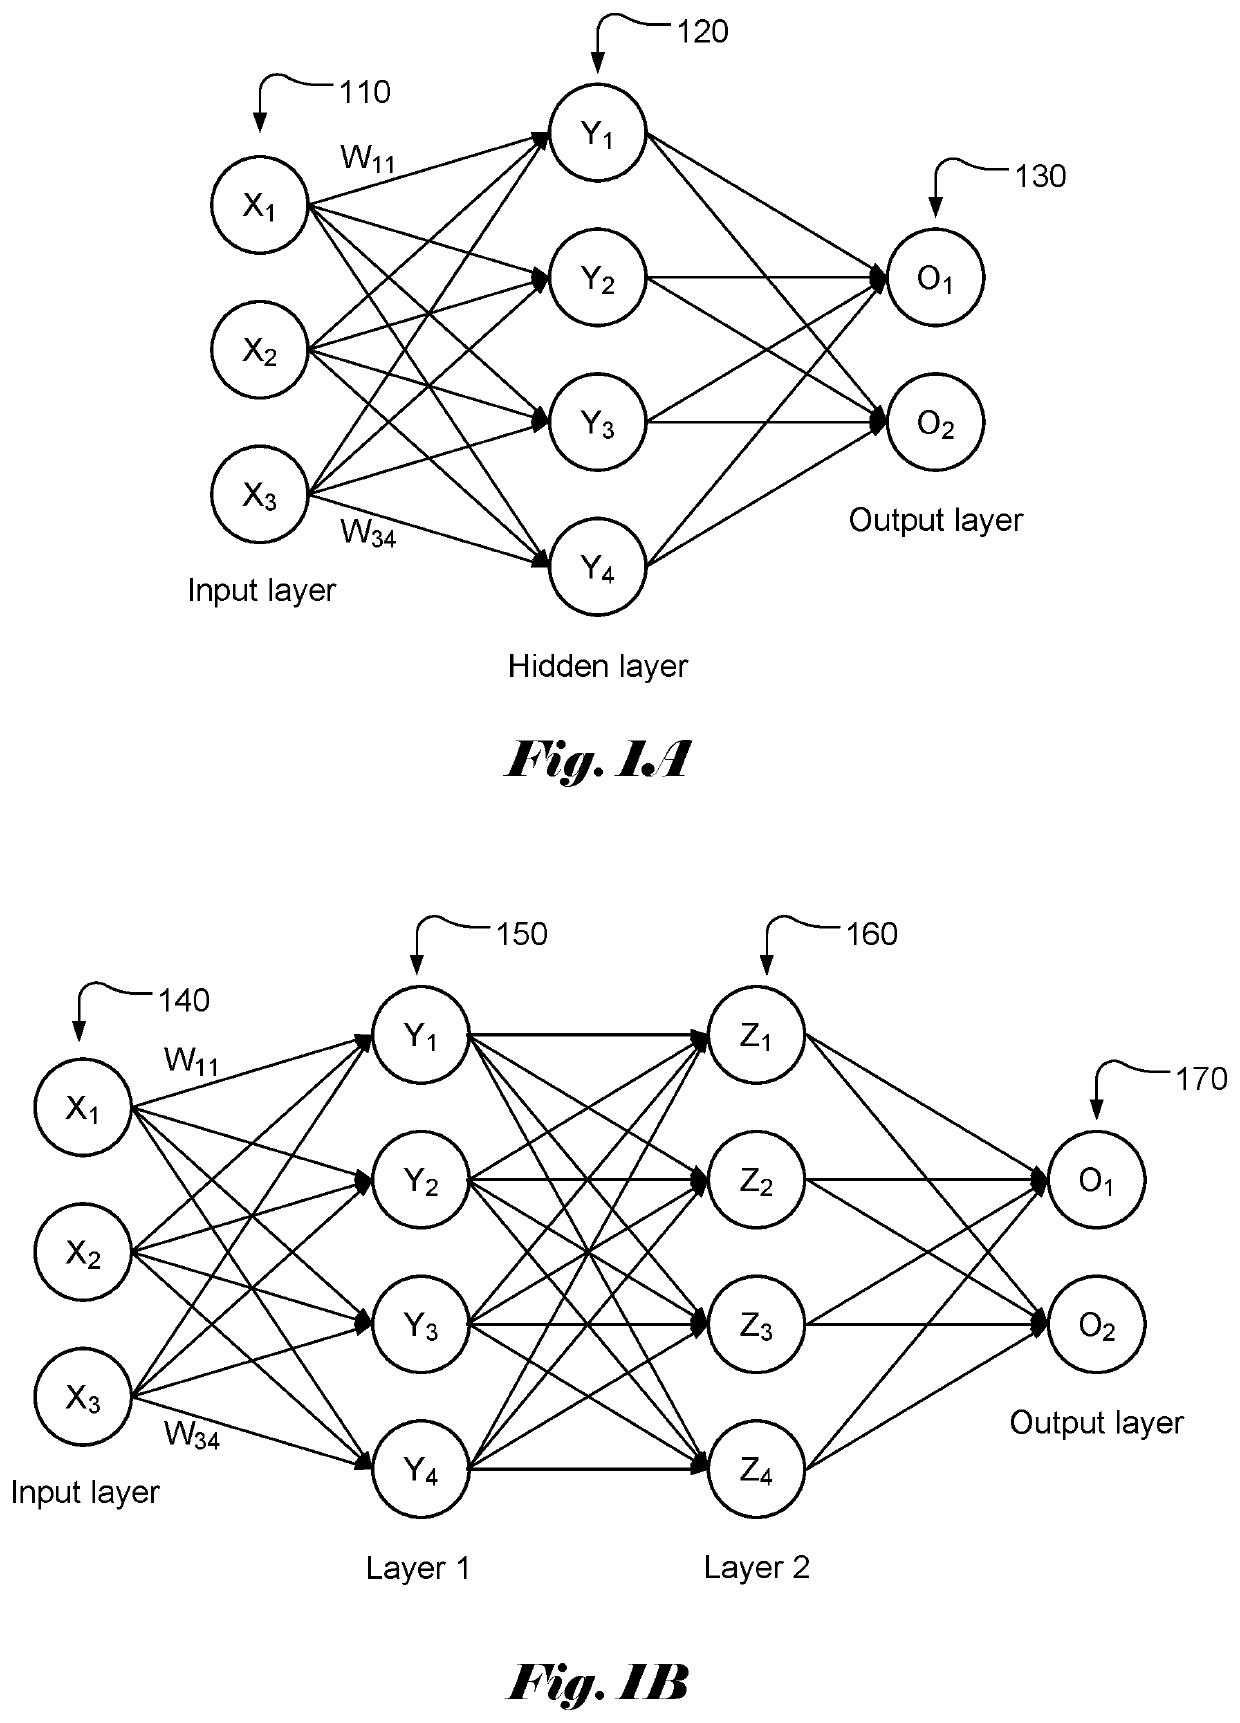 Apparatus and Method of Fast Floating-Point Adder Tree for Neural Networks